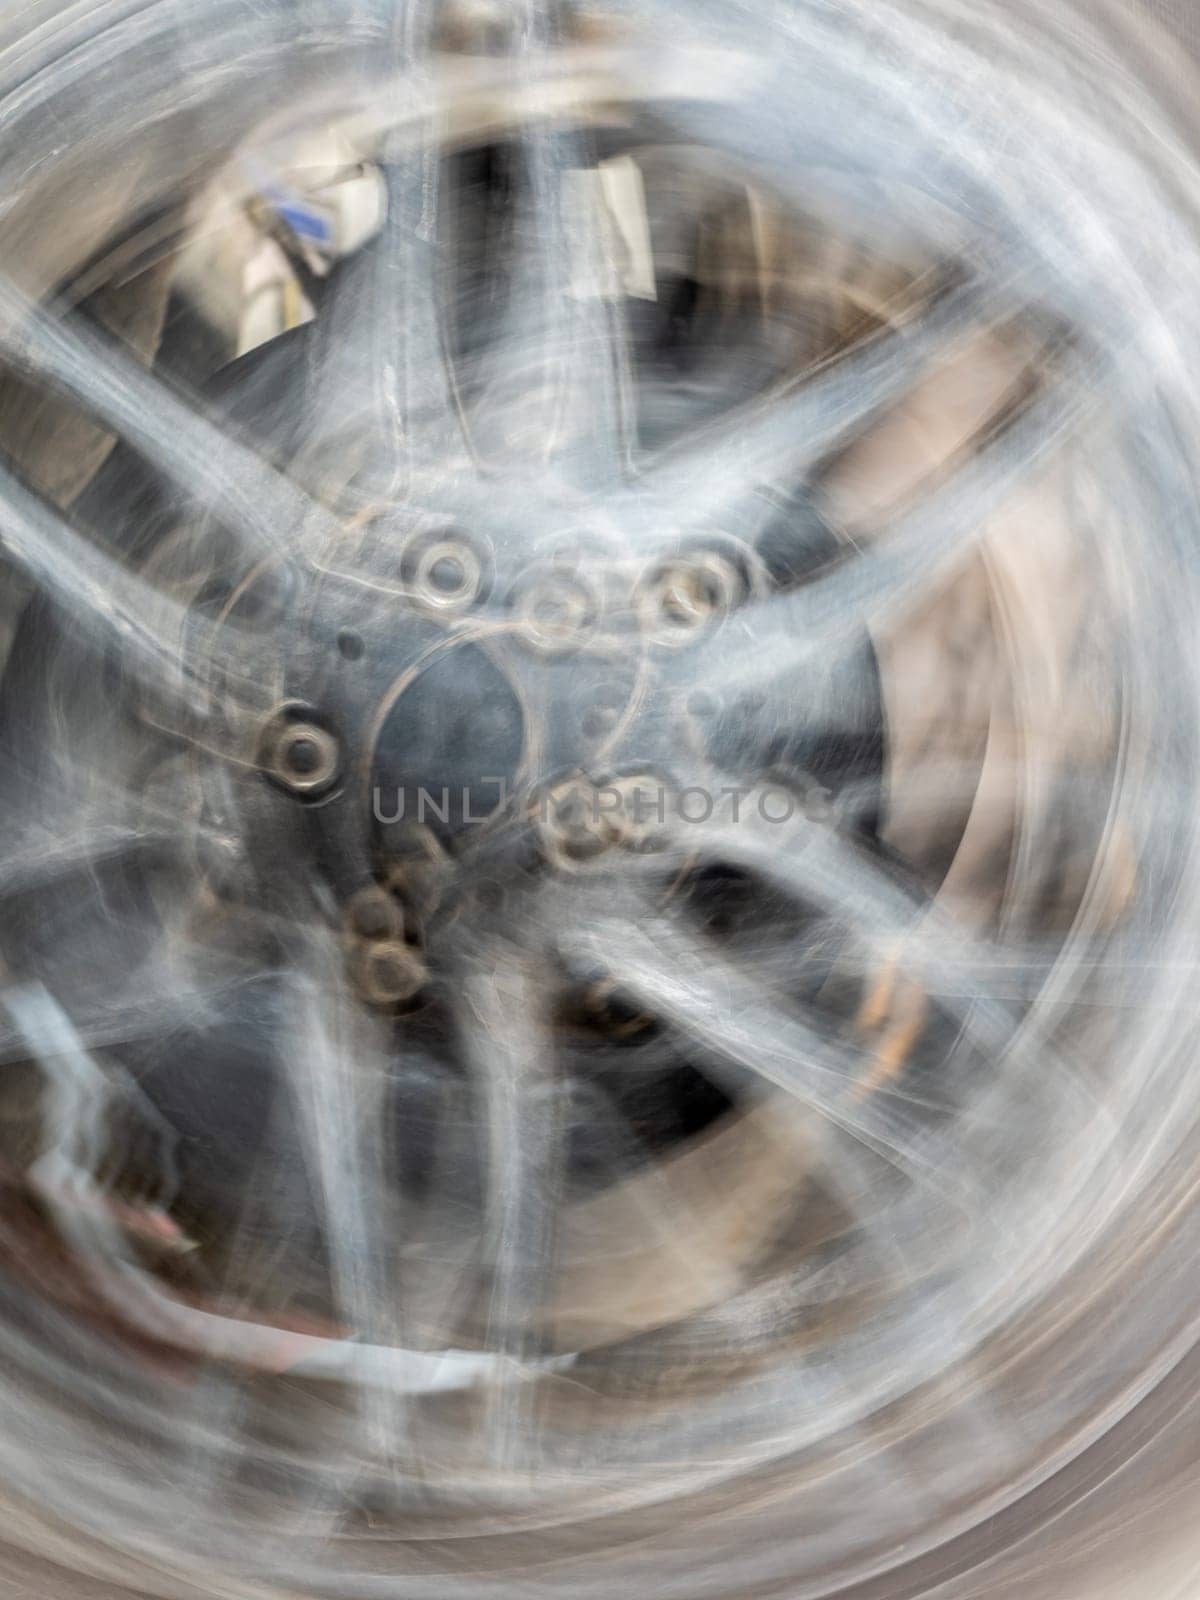 The motion blurred image of the vehicle wheel by Satakorn